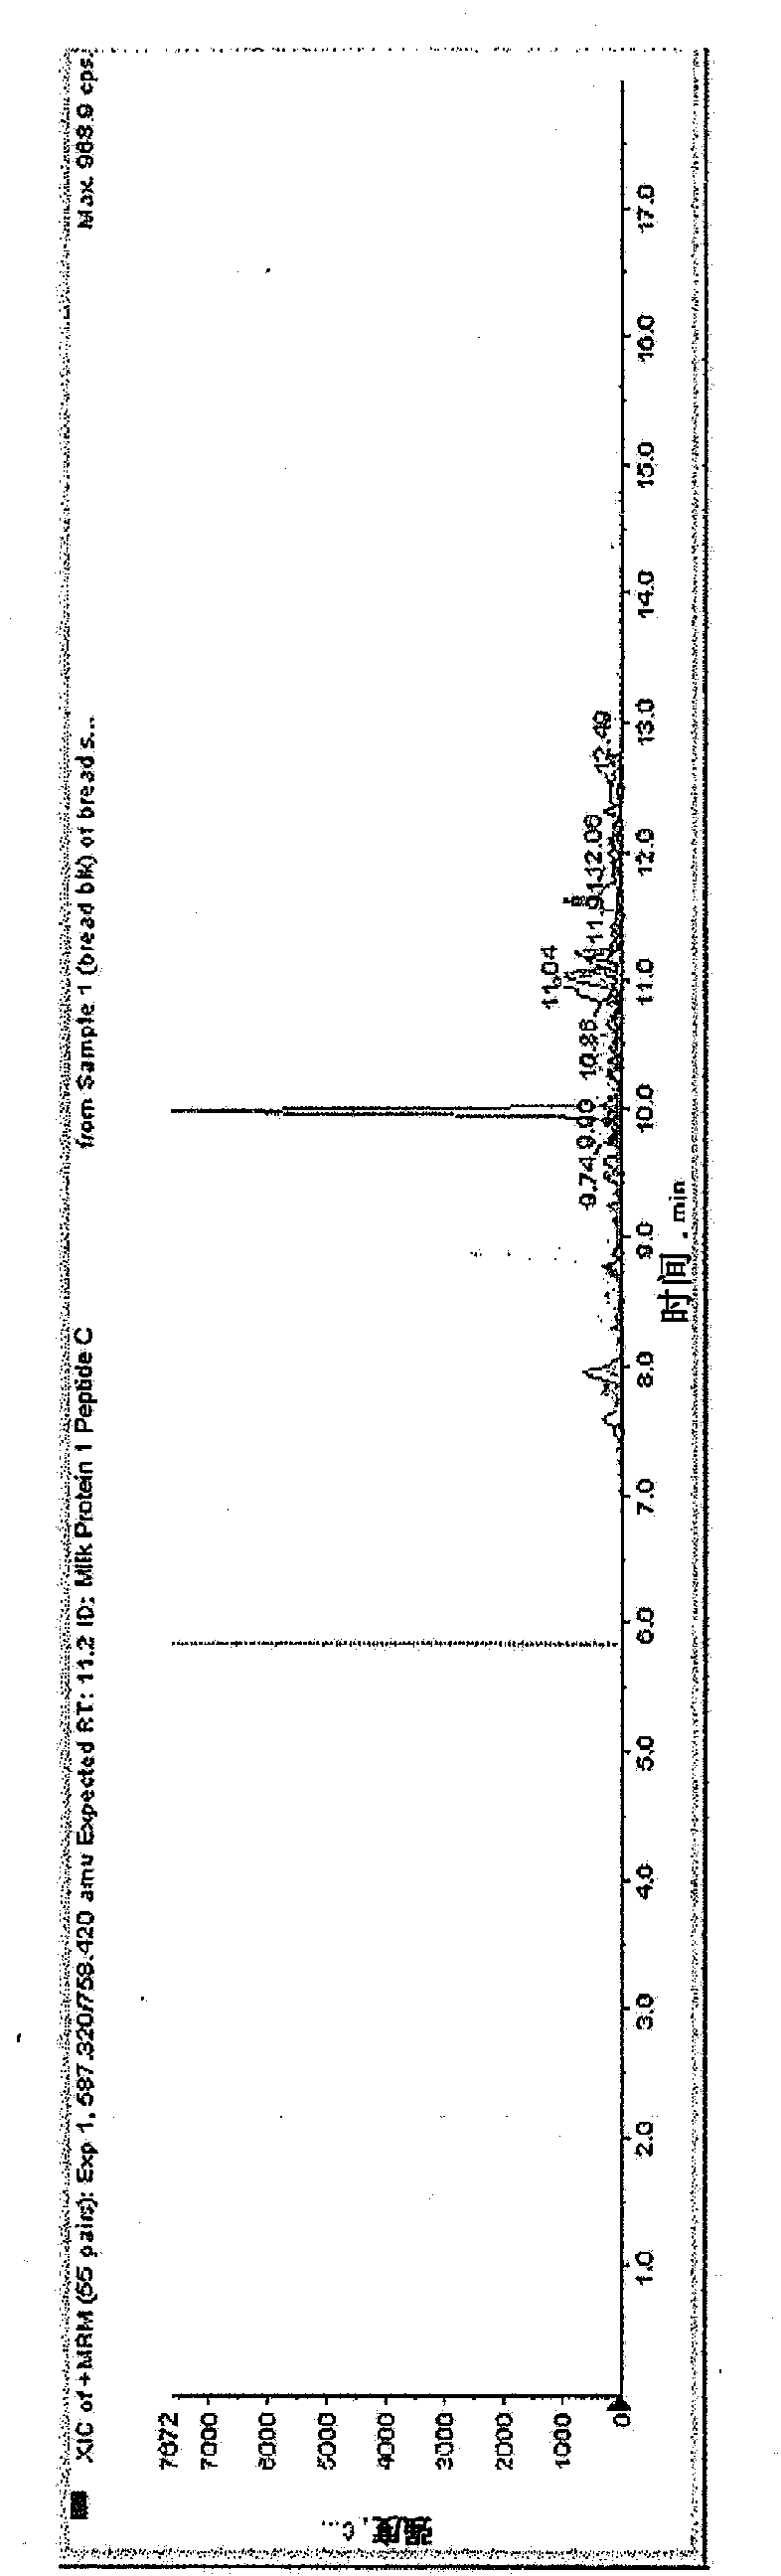 System and method for detection of allergens